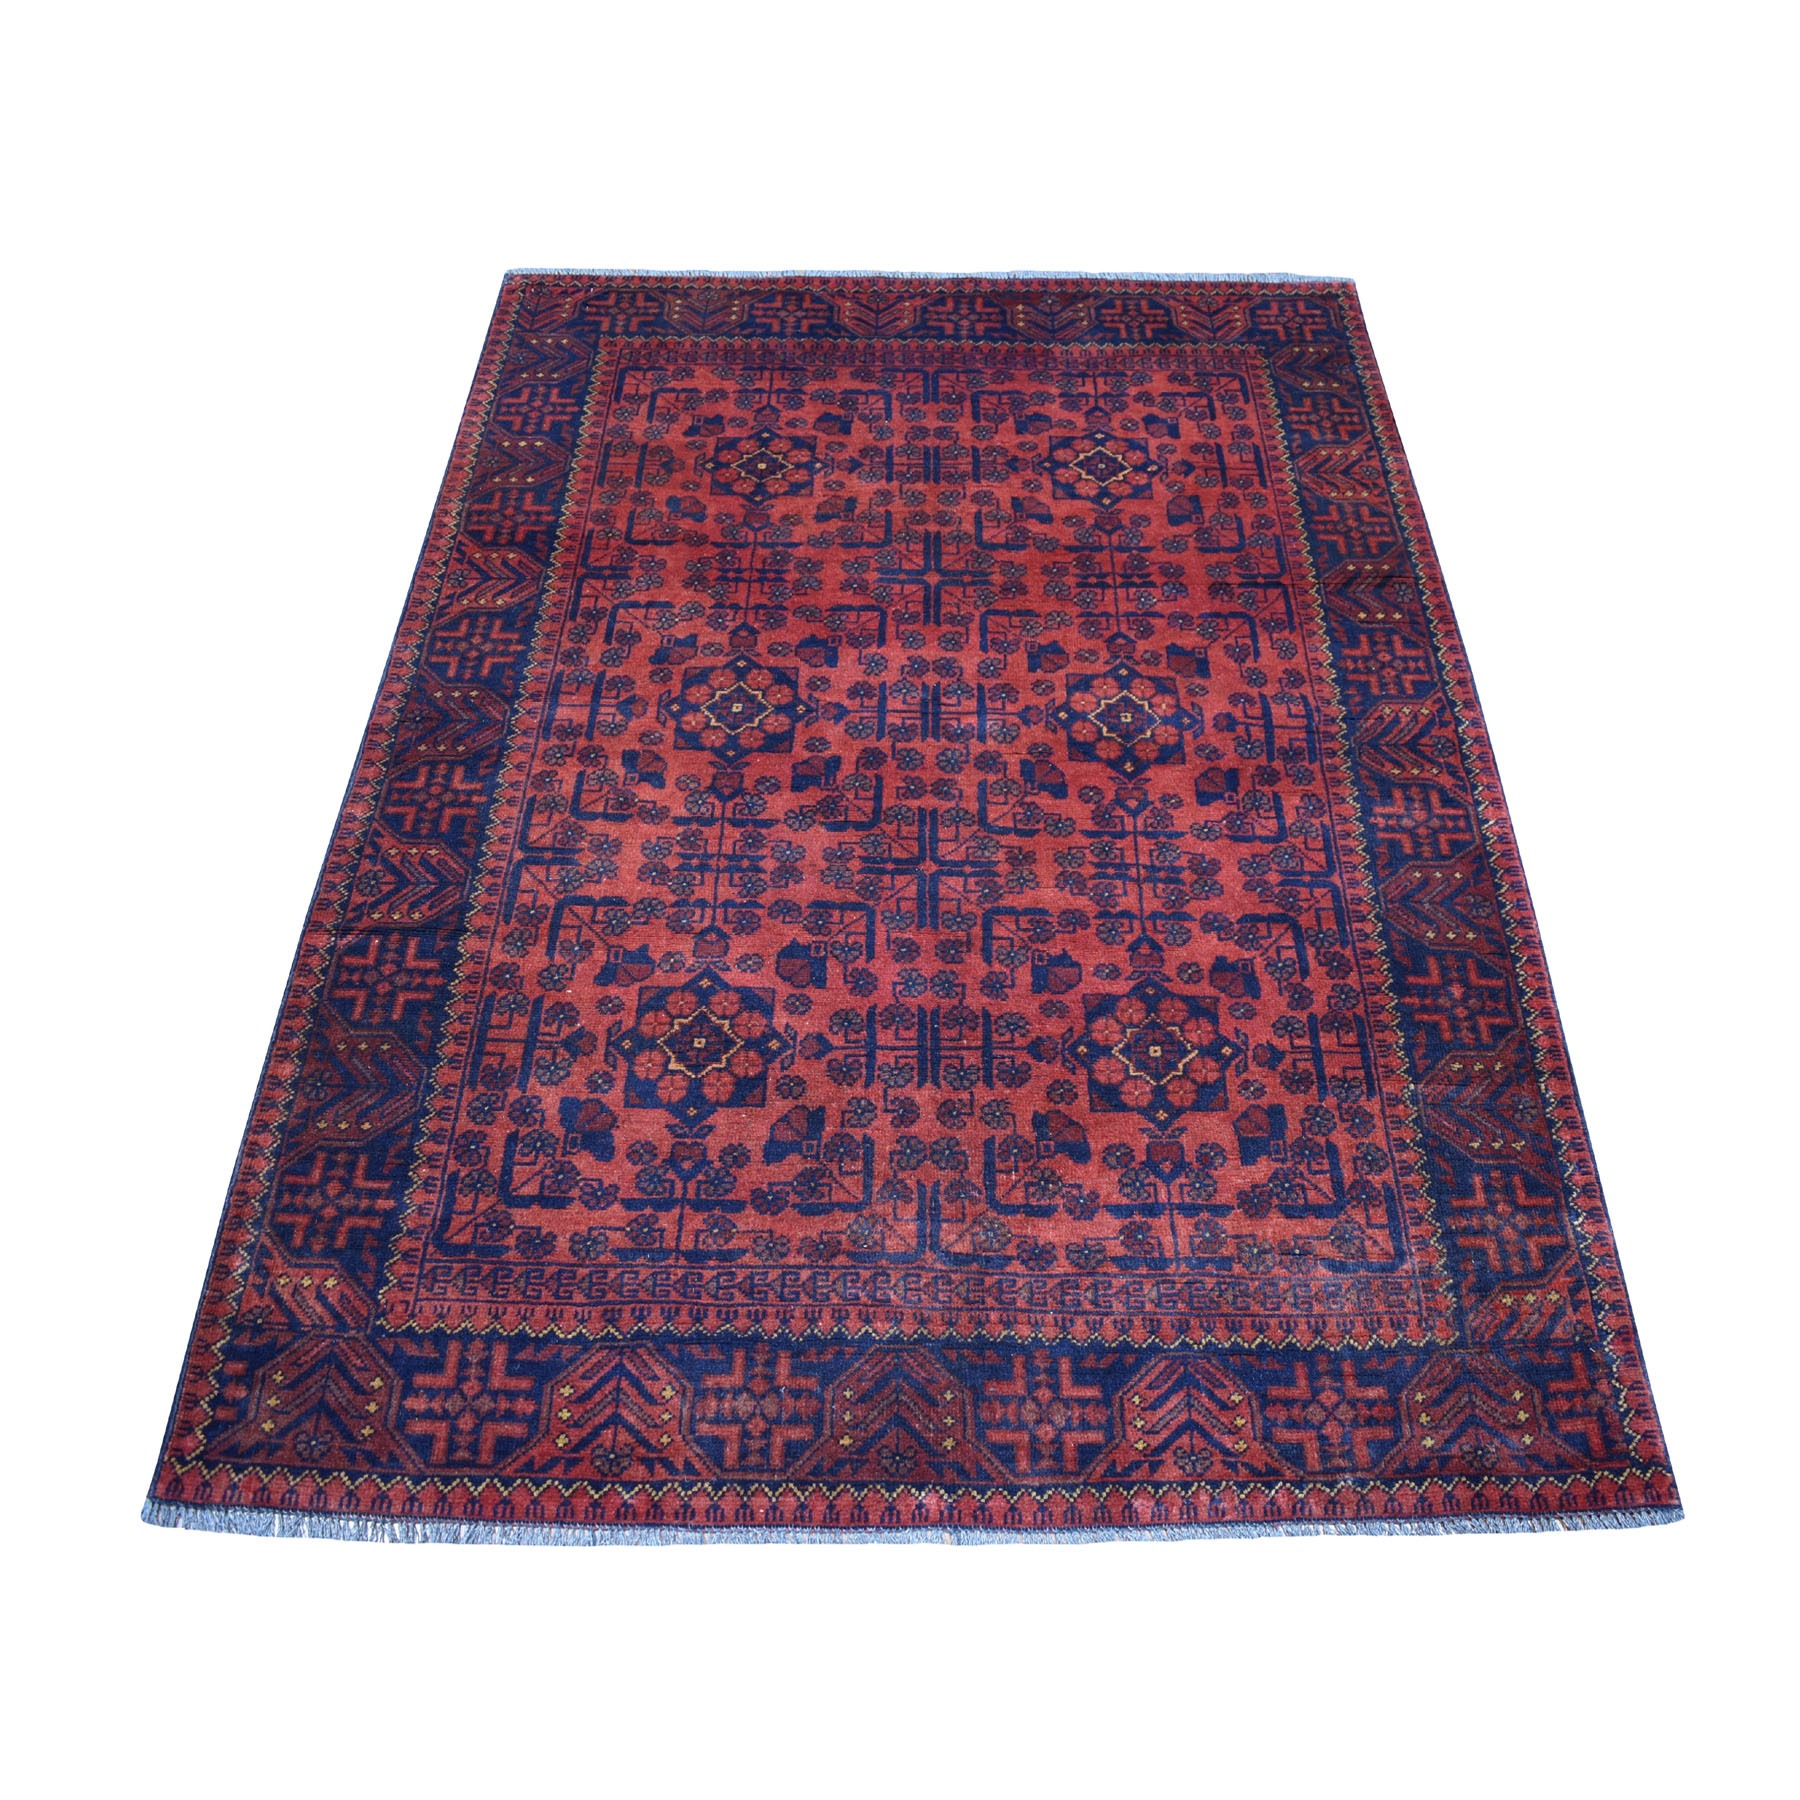 4'3"X6'4" Deep And Saturated Red Geometric Afghan Andkhoy Pure Wool Hand Knotted Oriental Rug moaec69c